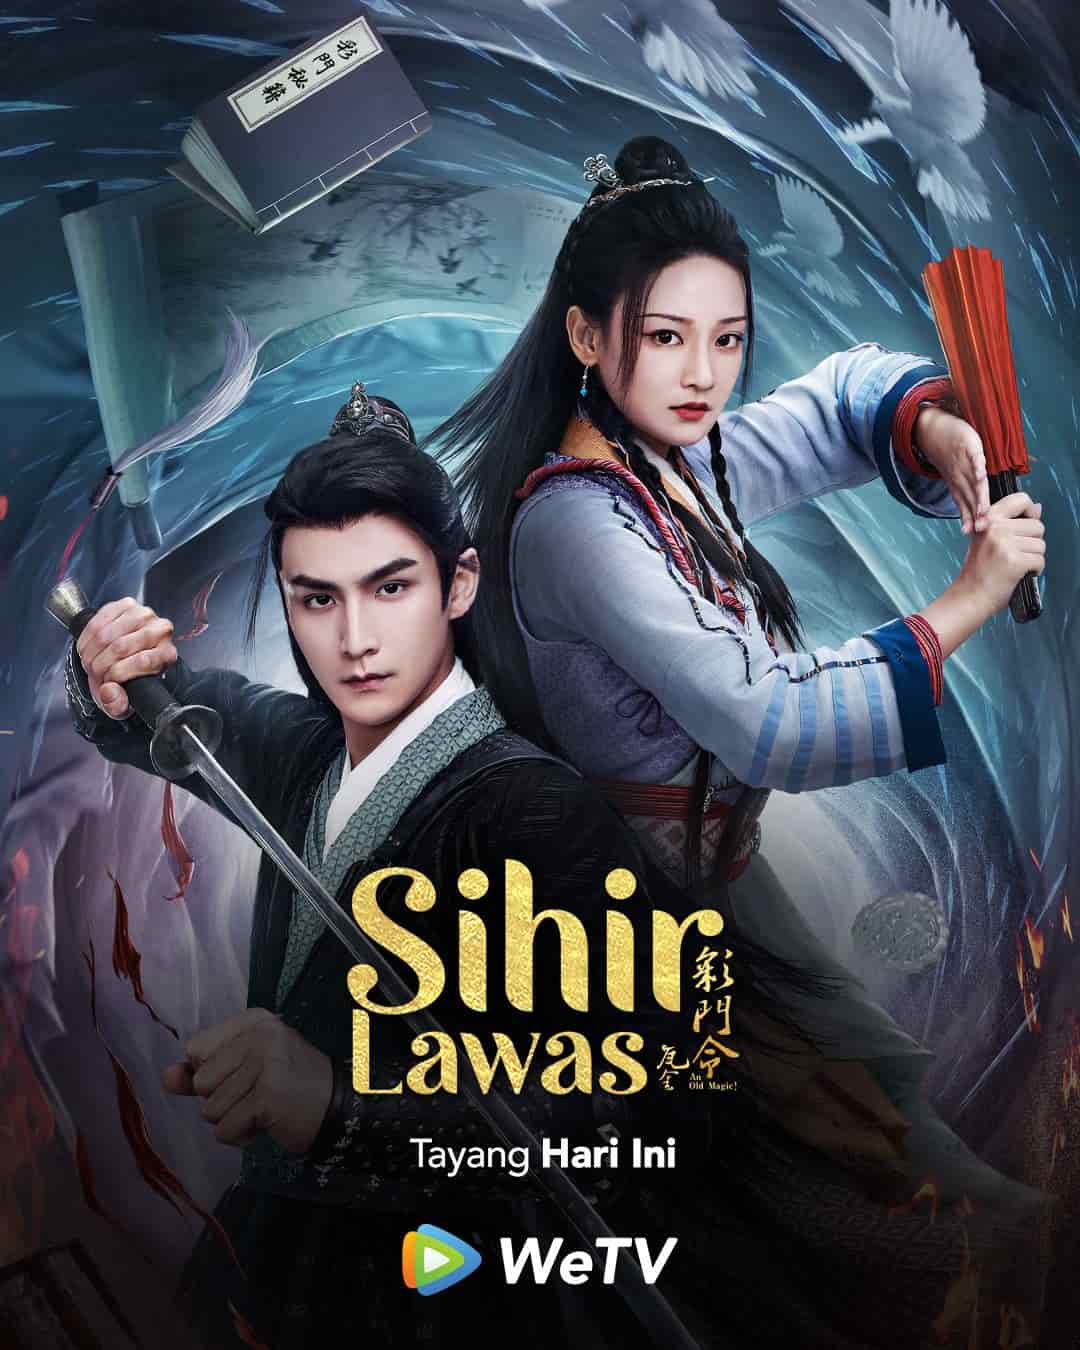 An Old Magic - Sinopsis, Pemain, OST, Episode, Review